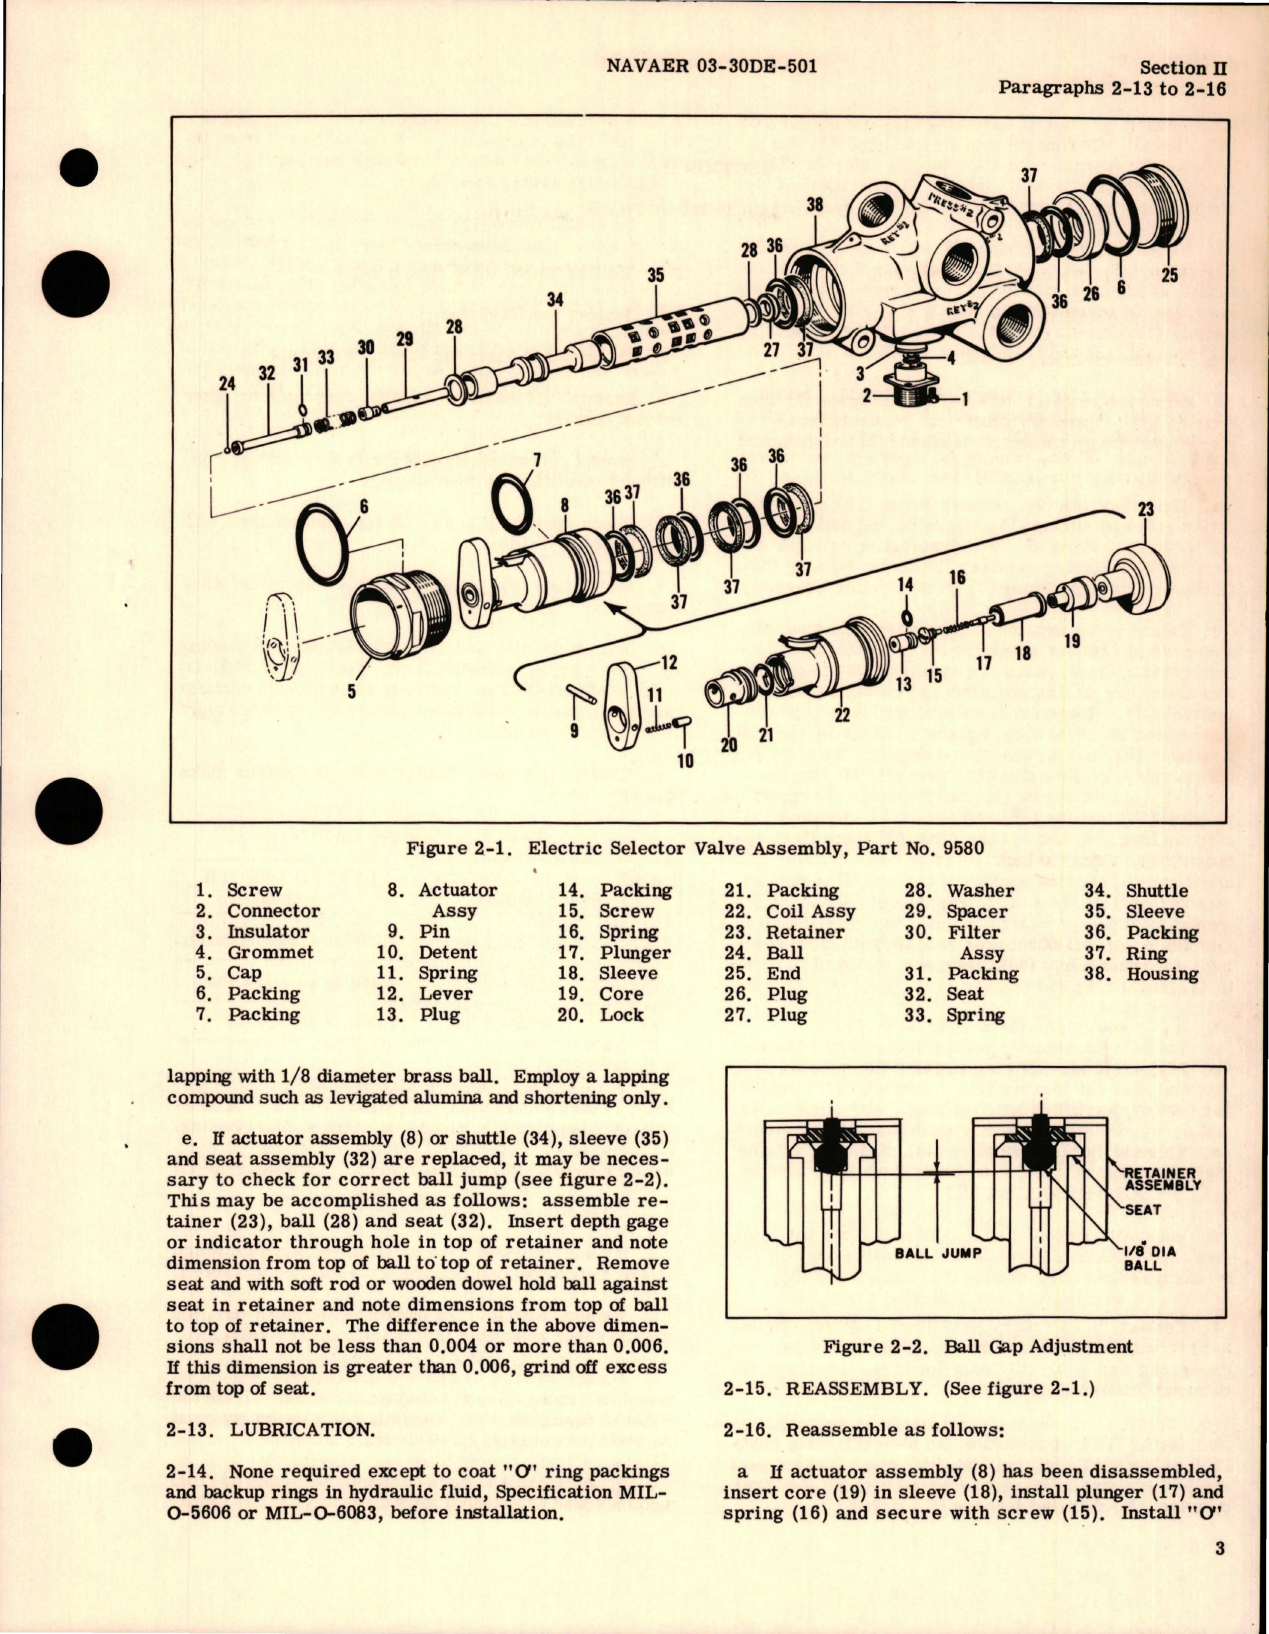 Sample page 7 from AirCorps Library document: Overhaul Instructions for Electric Selector Valve Assembly - Part 9580 and 9580-1